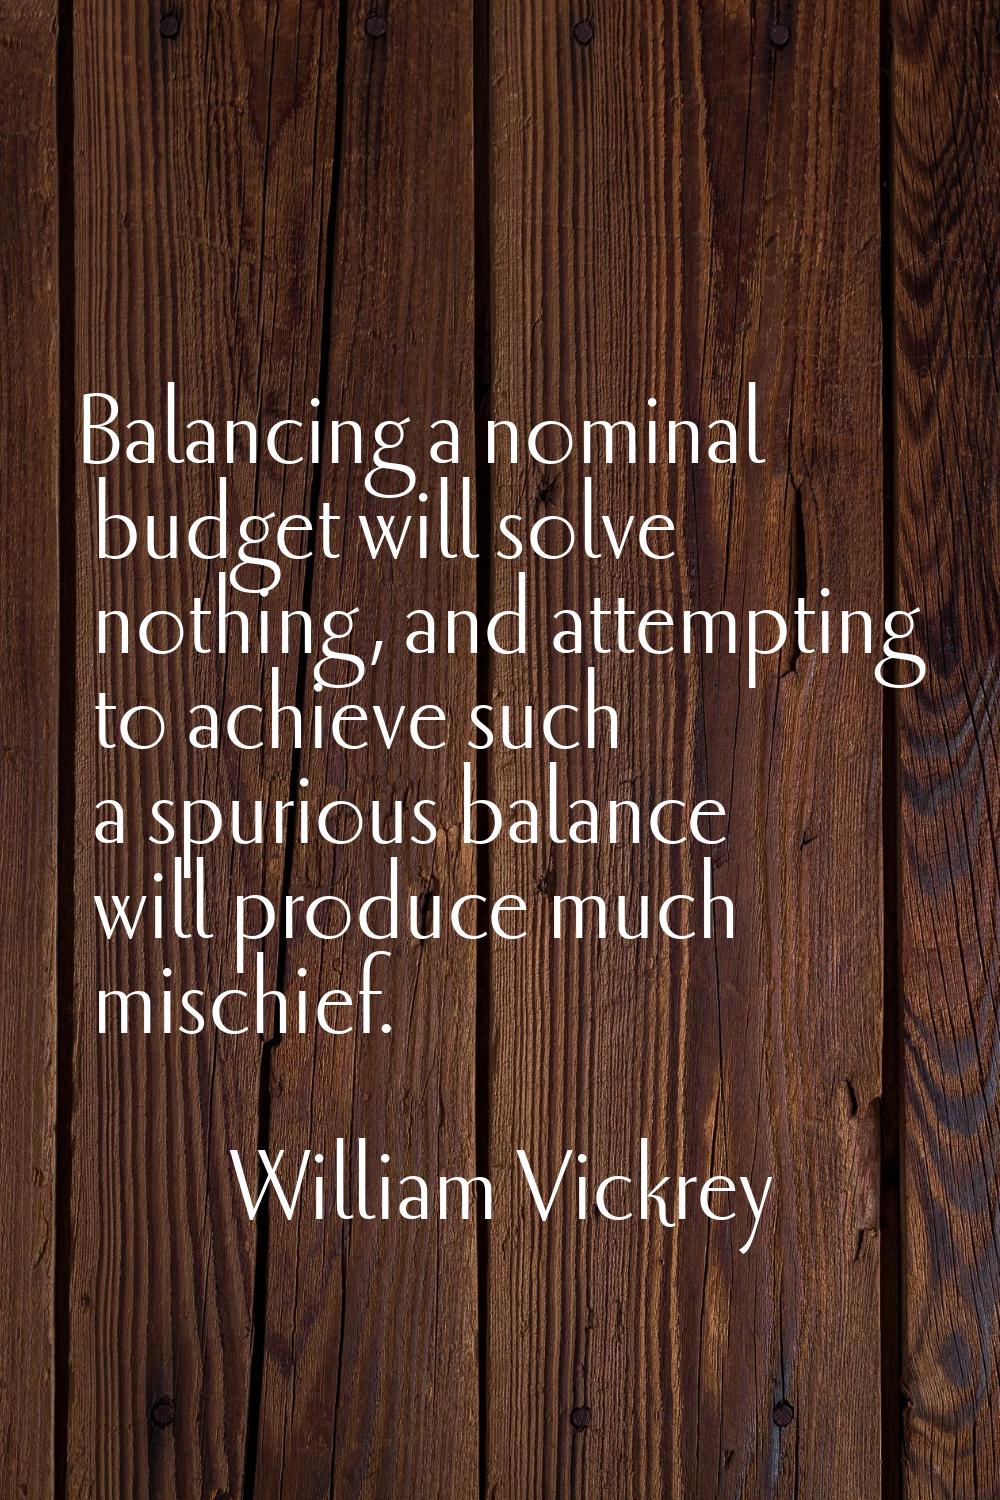 Balancing a nominal budget will solve nothing, and attempting to achieve such a spurious balance wi